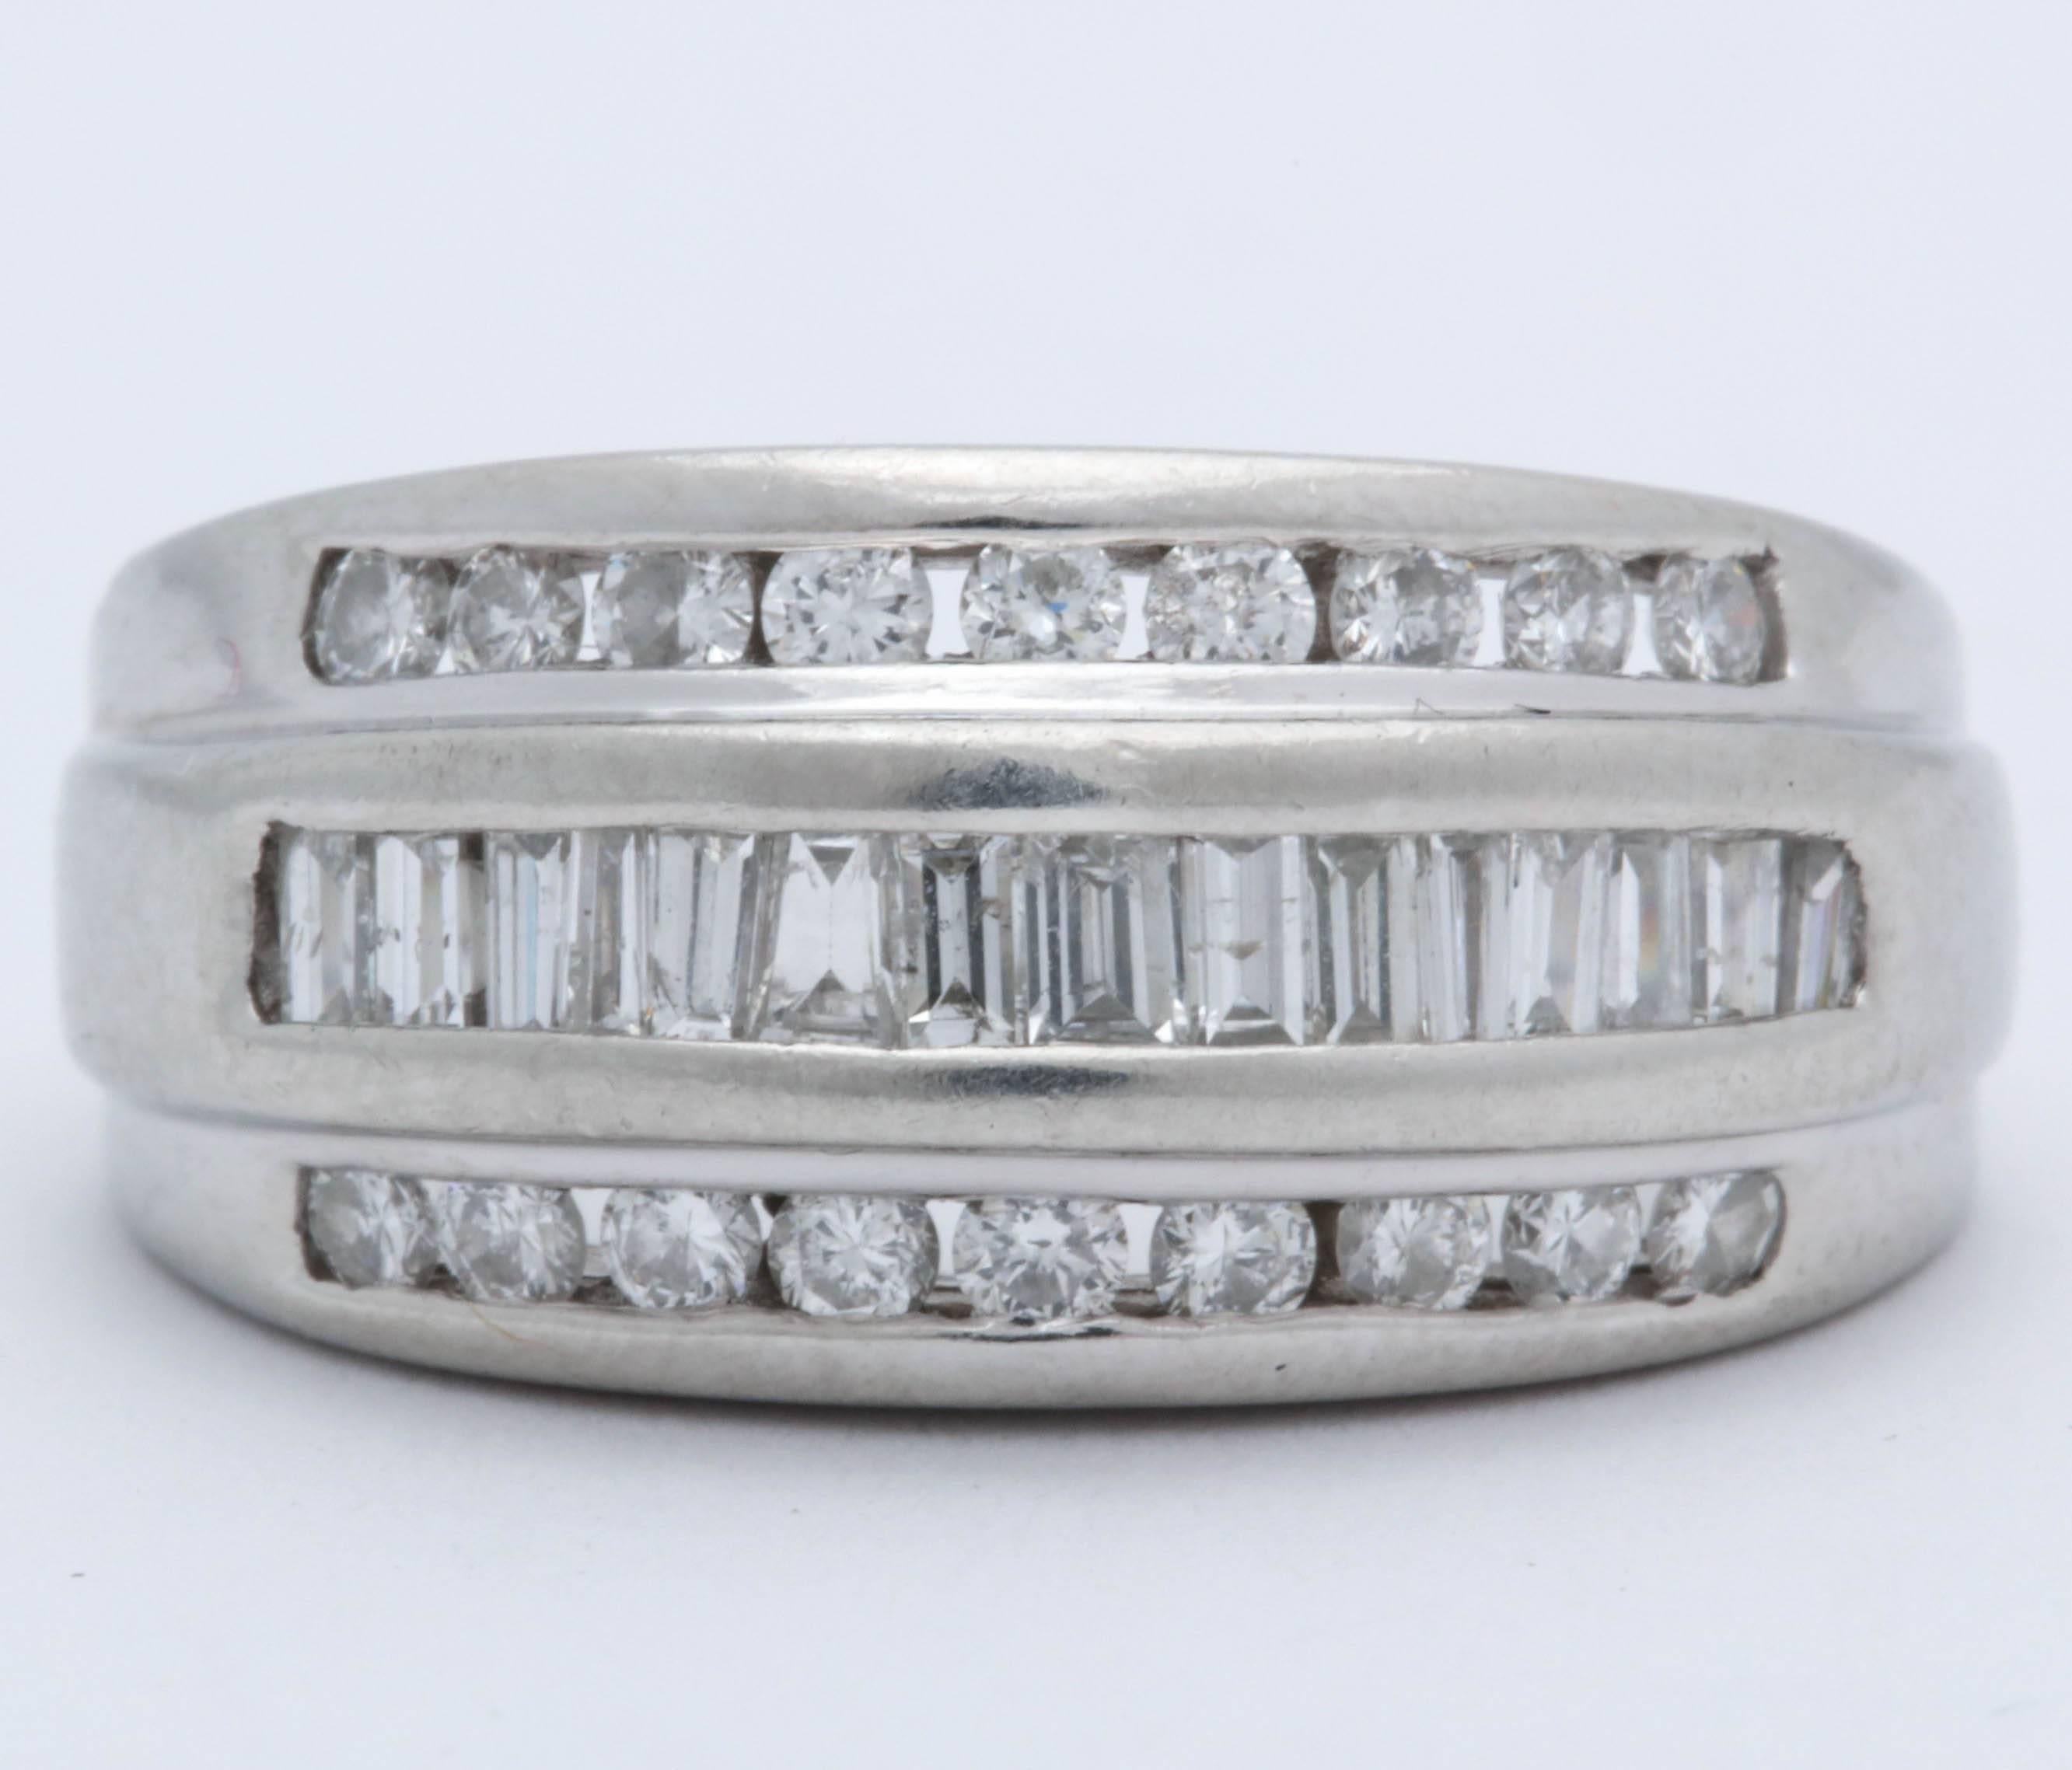 One Platinum Half Way Bombe Style Band Ring Embellished With Numerous Baguette Cut Diamonds In Center Of Ring Weighing Approximately 1.00 Carats Further embellished With Two Rows Of Invisible Set Full Cut diamonds weighing approximately 1 Carat. All